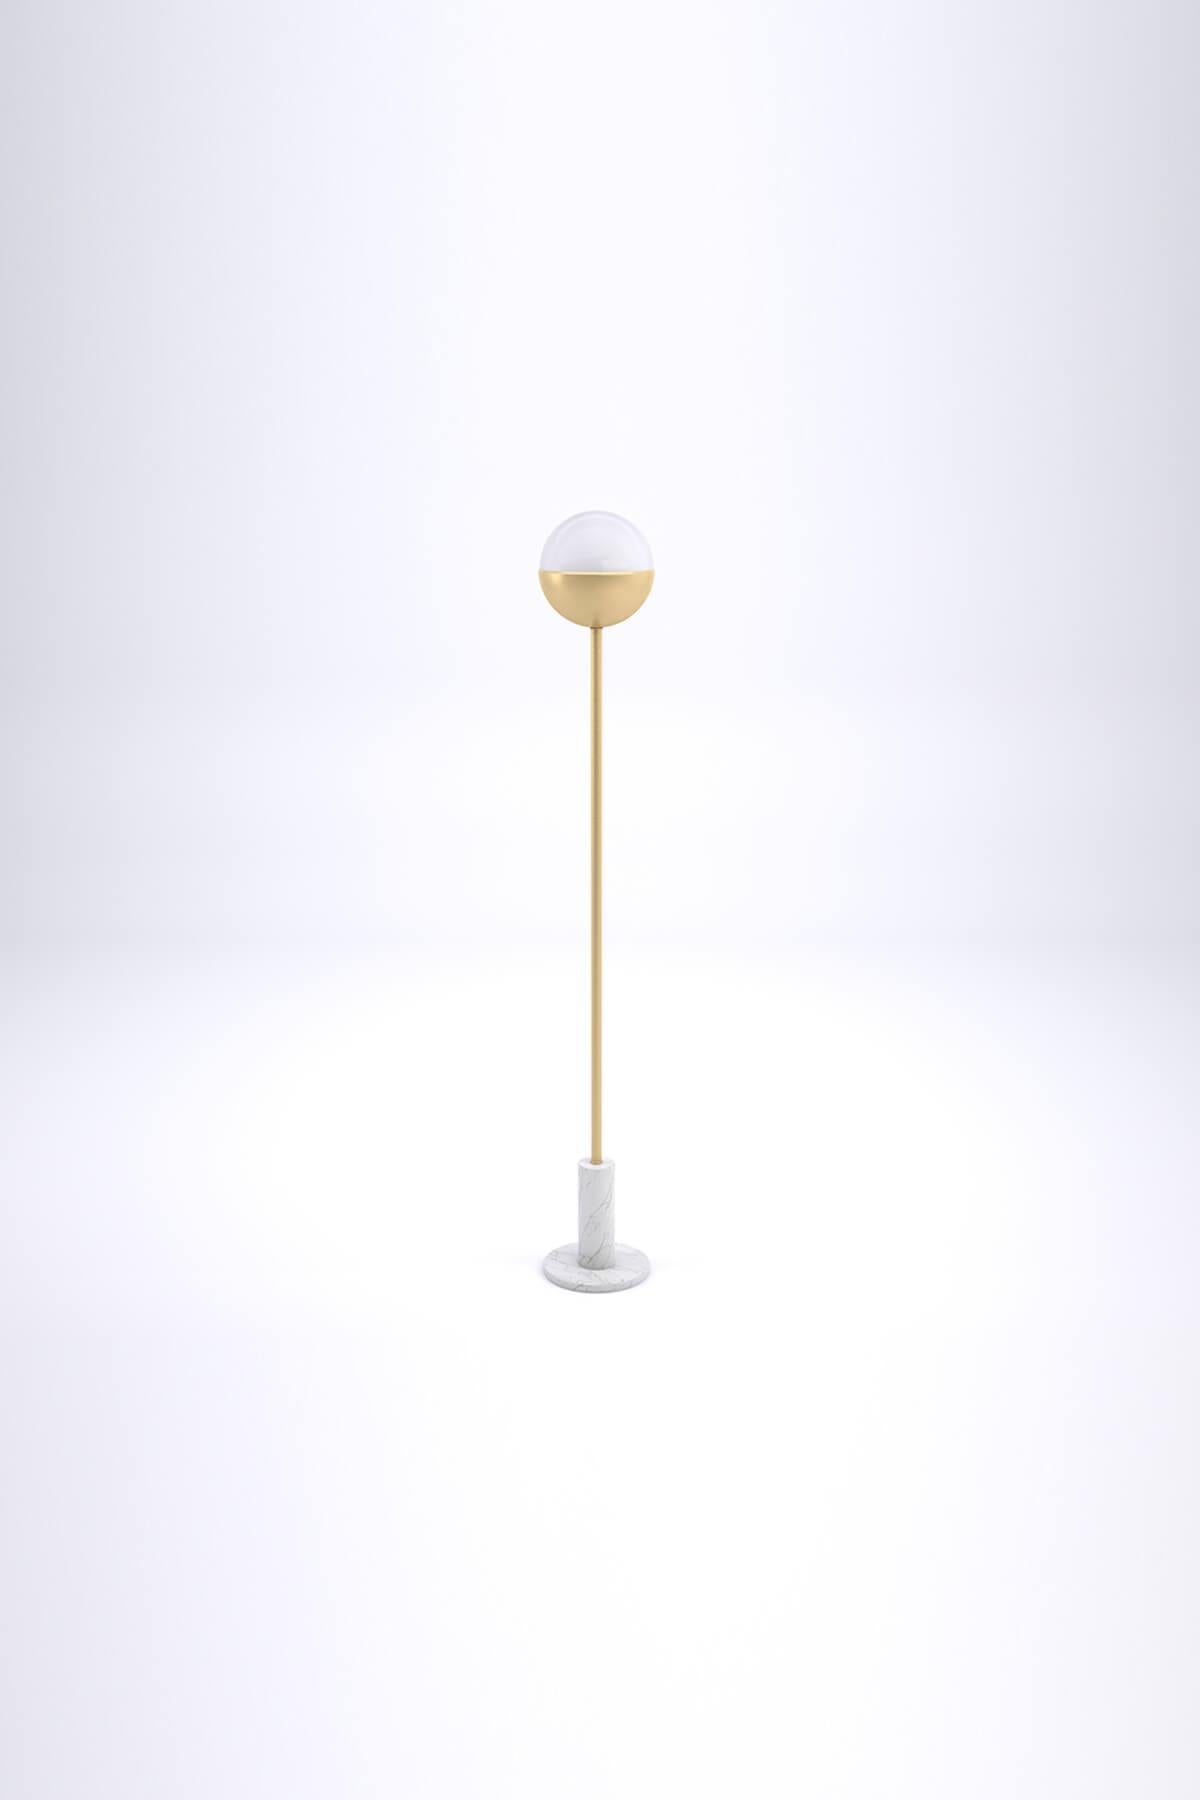 Famed floor lamp by Lagu.
Designed by Ufuk Ceylan.
Dimensions: Ø 26 x H 182 cm.
Materials: Metal, Marble.

While the organic form of the marble and brass combination carries the symbol of the universe to the spaces, Famed Floor Lamp provides